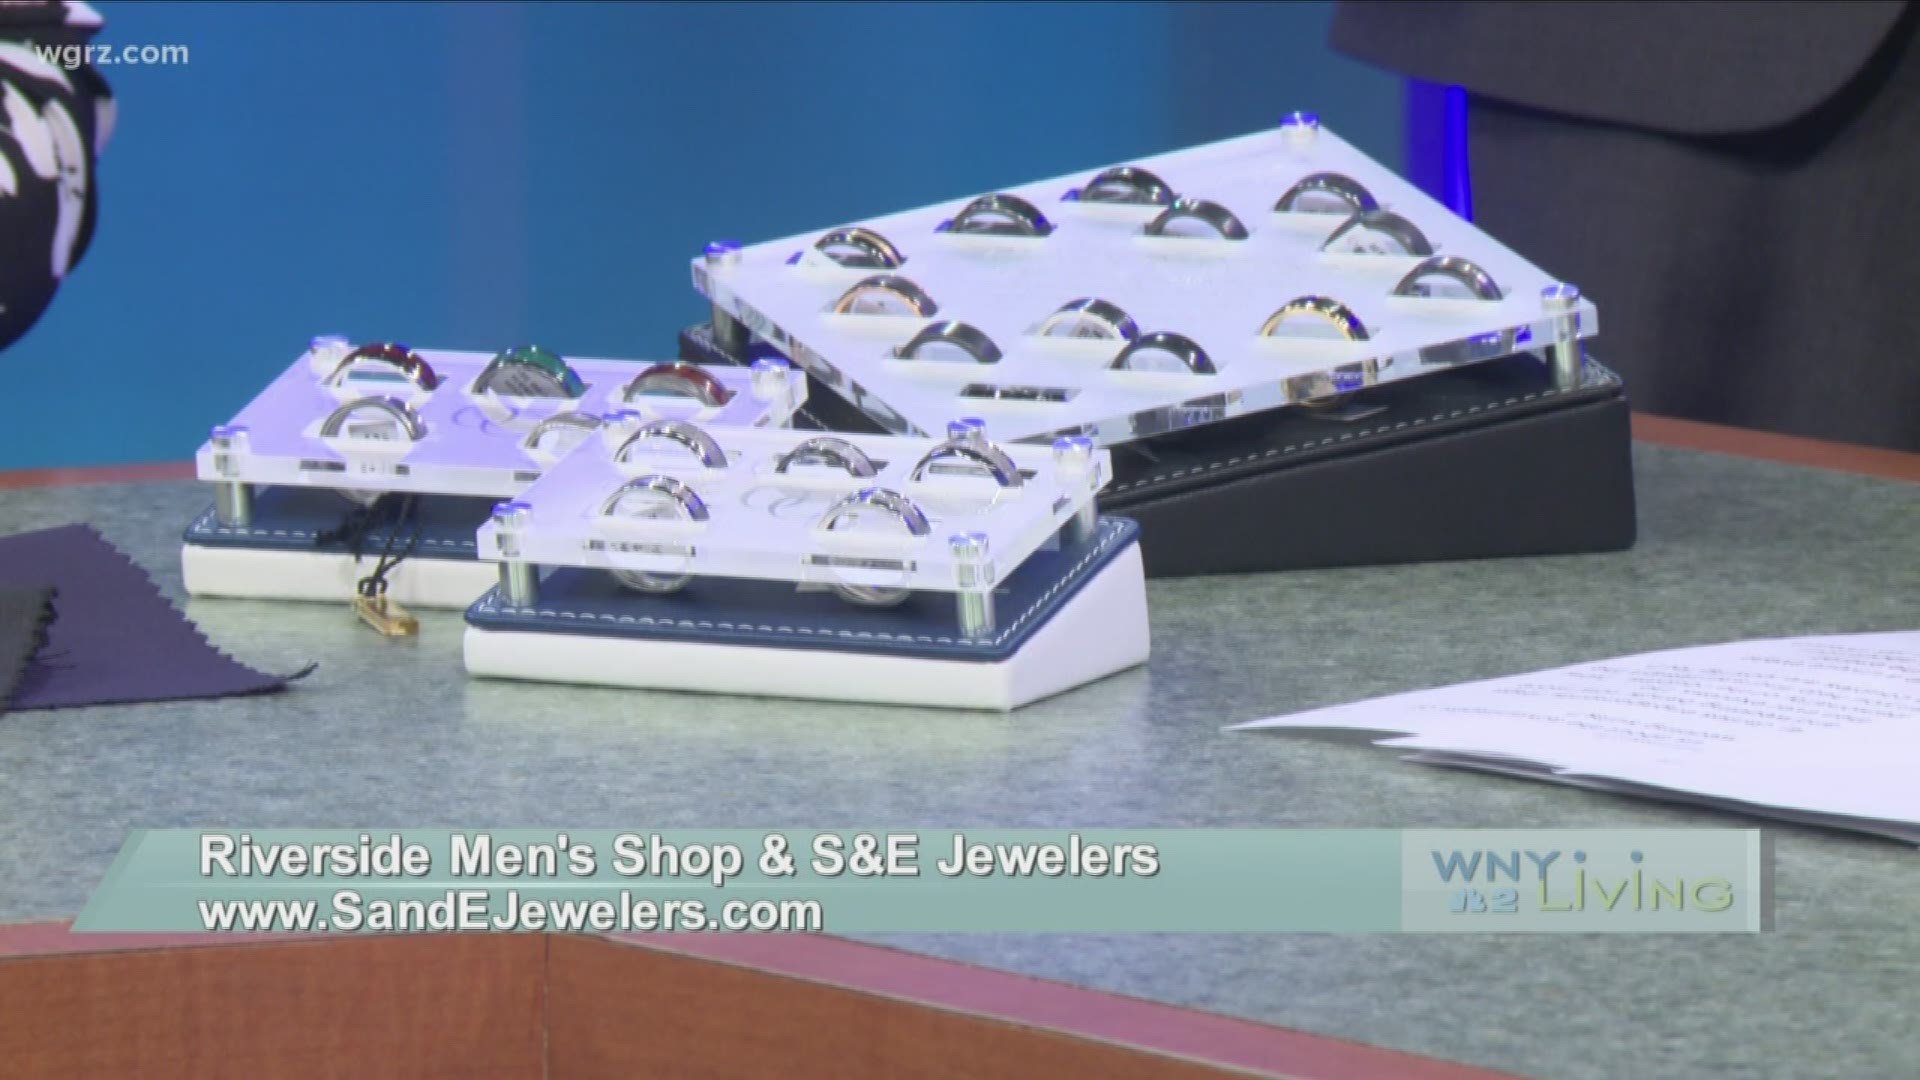 January 11 - Riverside Men’s Shop & S&E Jewelers (THIS VIDEO IS SPONSORED BY RIVERSIDE MENS SHOP AND S&E JEWELERS)